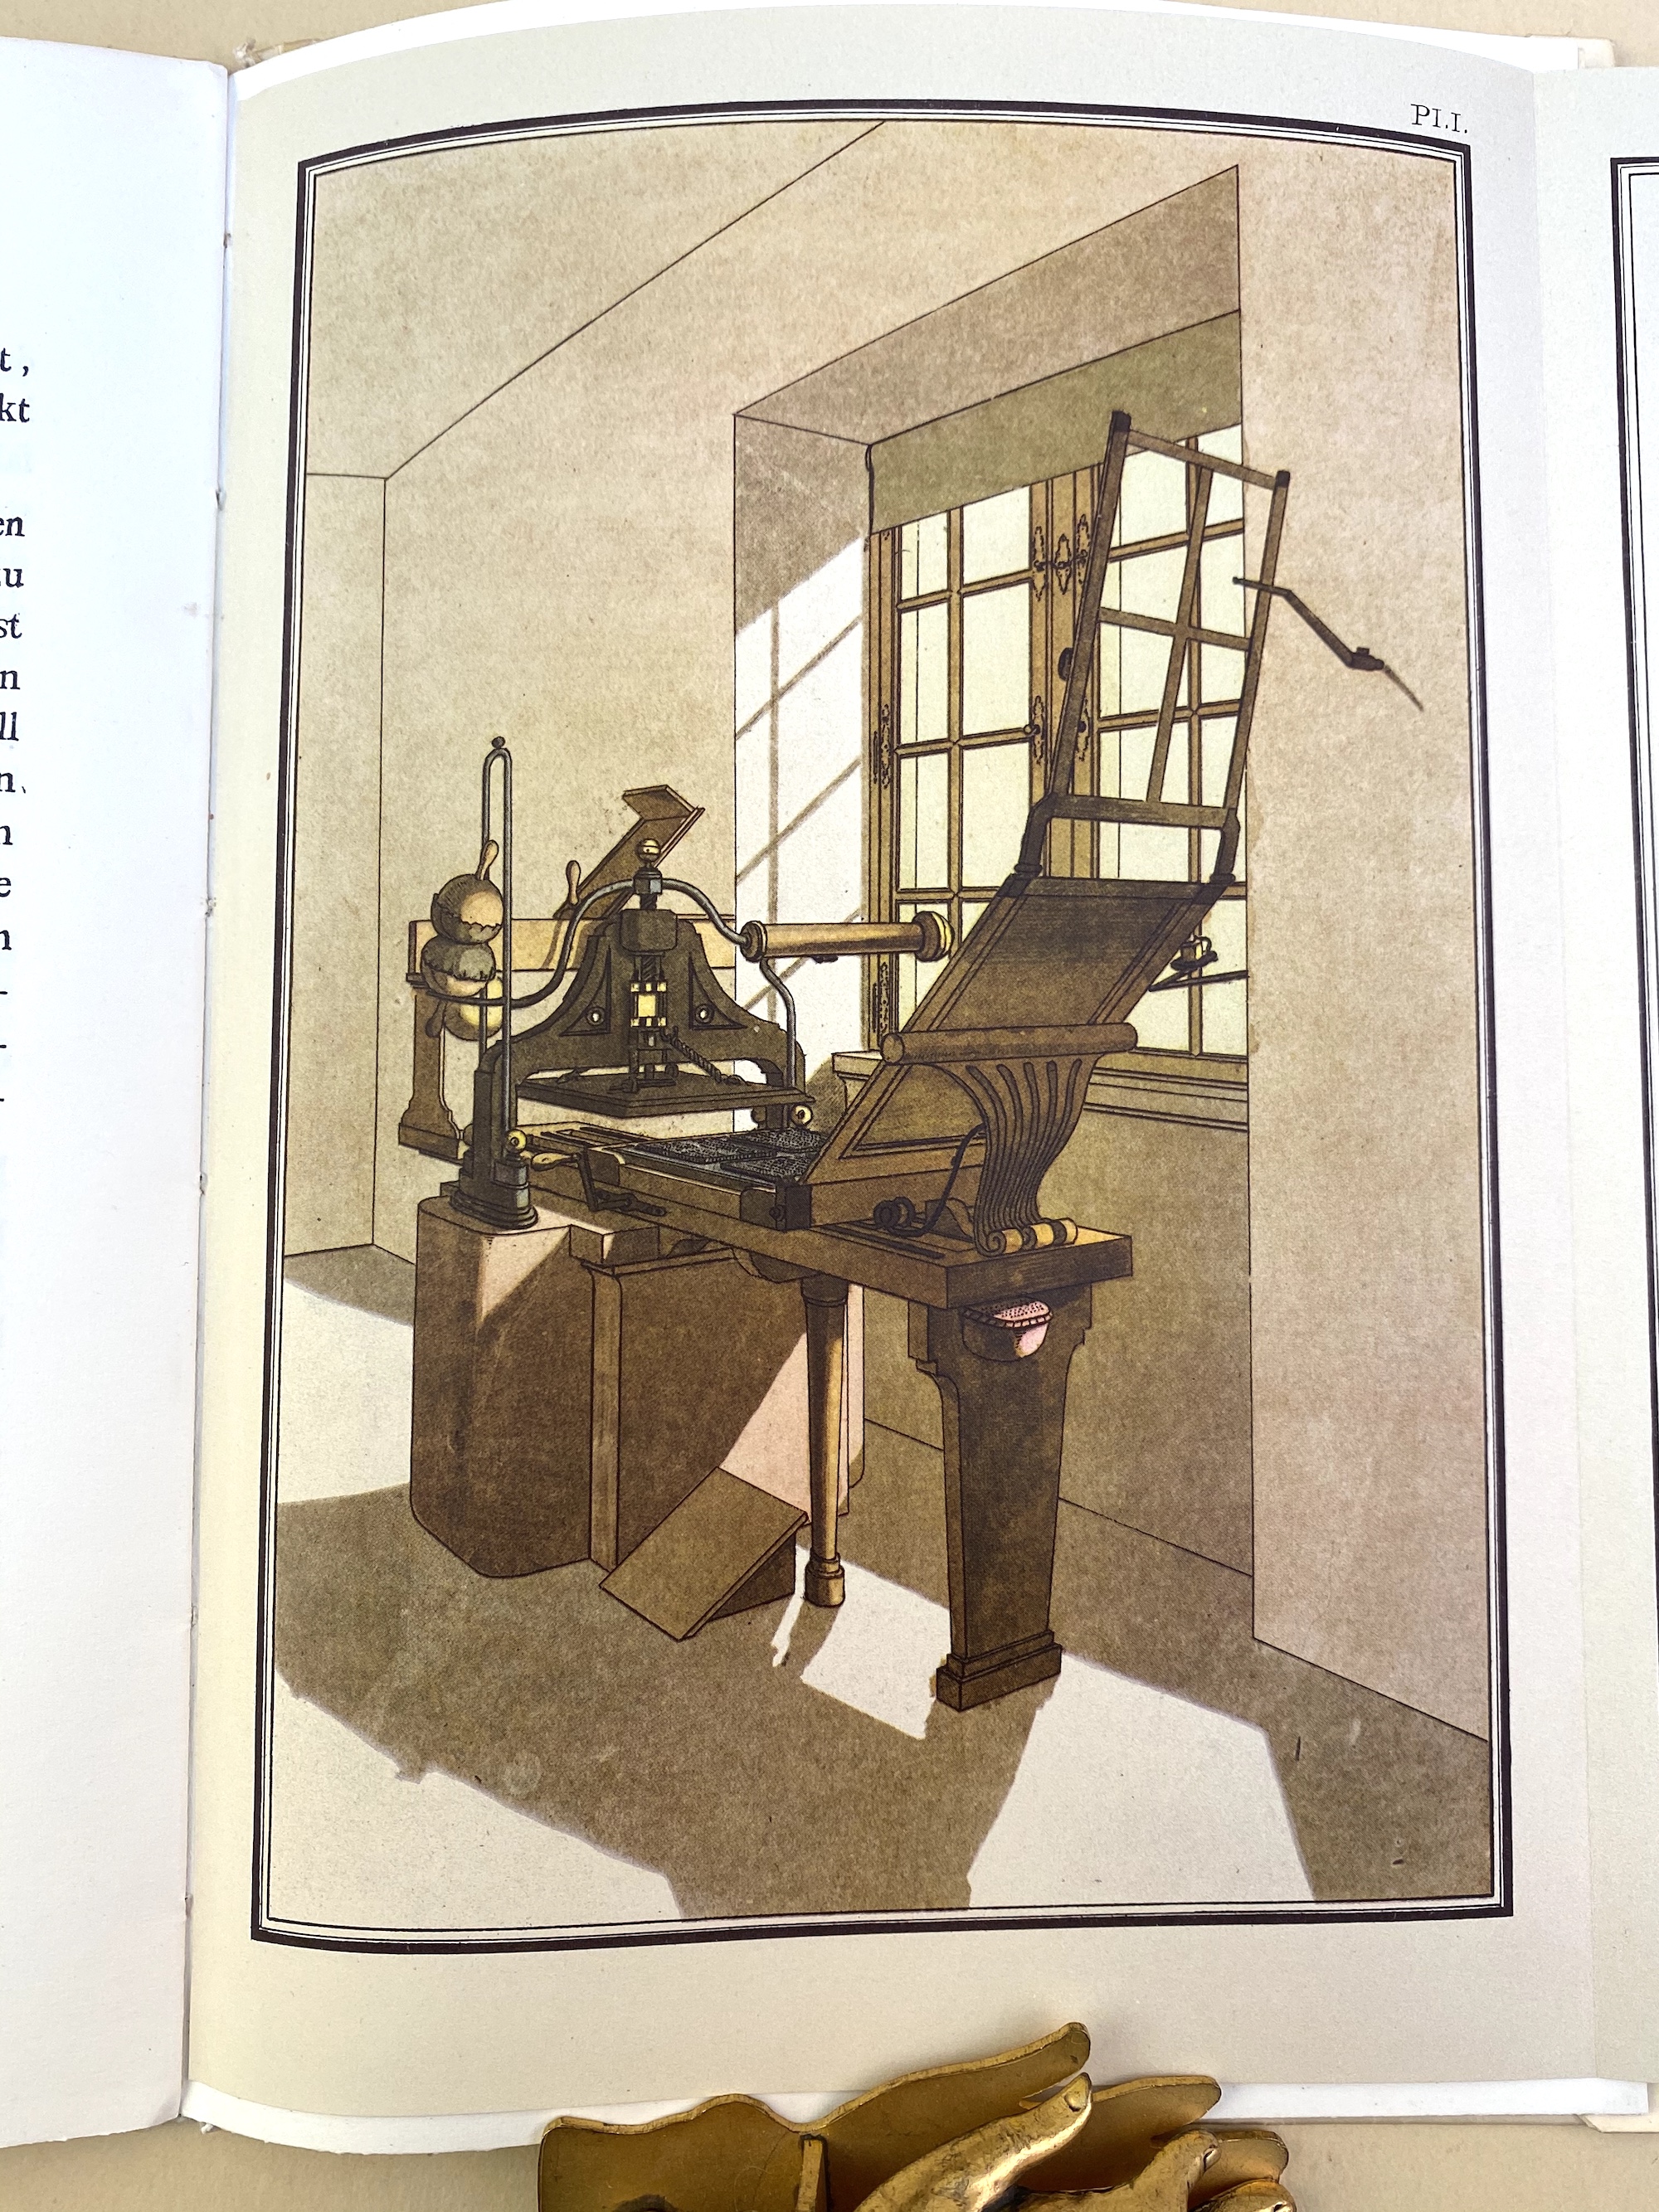 Reproduction in the 1955 facsimile of the engraving of the Haas press from the 1790 pamphlet from which the details of the press are known.